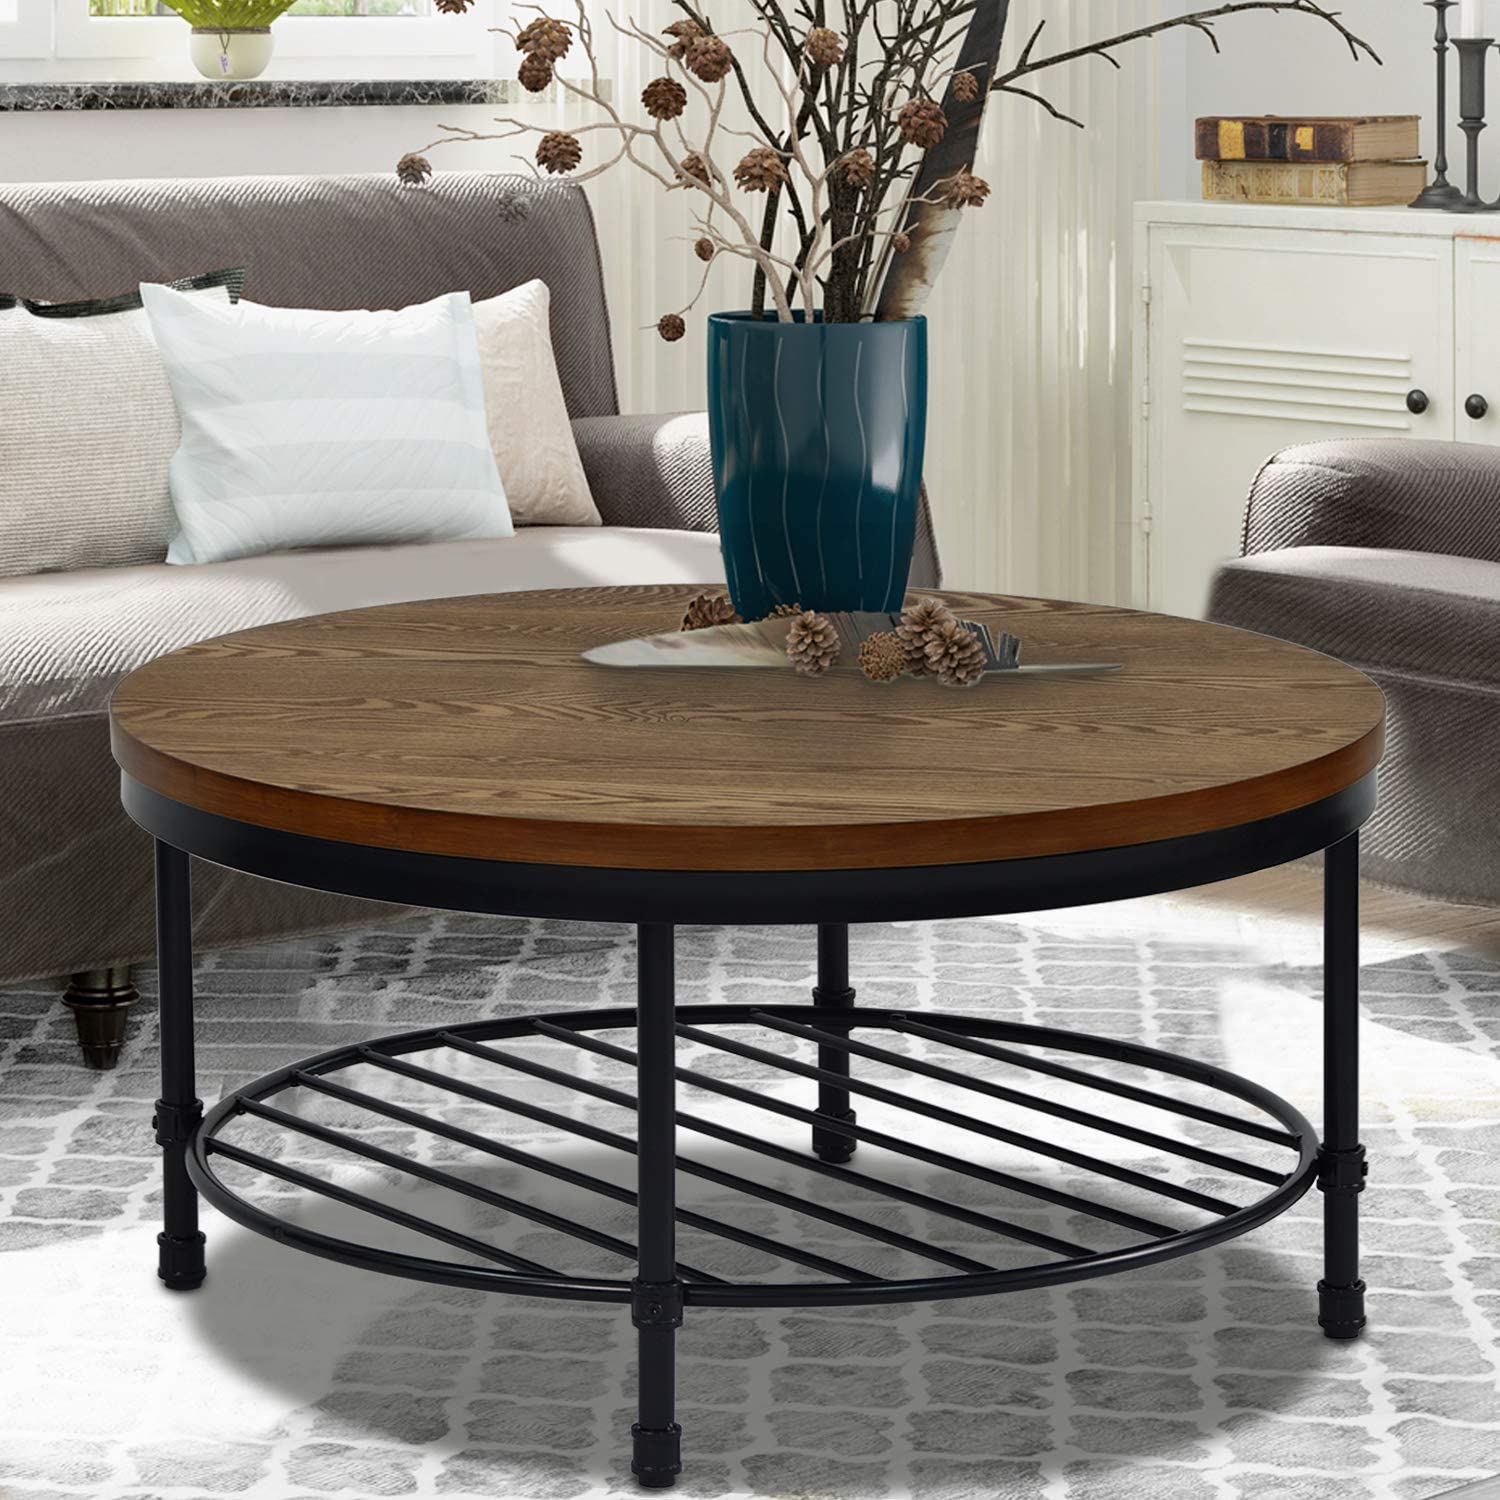 8 Best Wrought Iron Coffee Tables Iron Legs For A Strong Structure